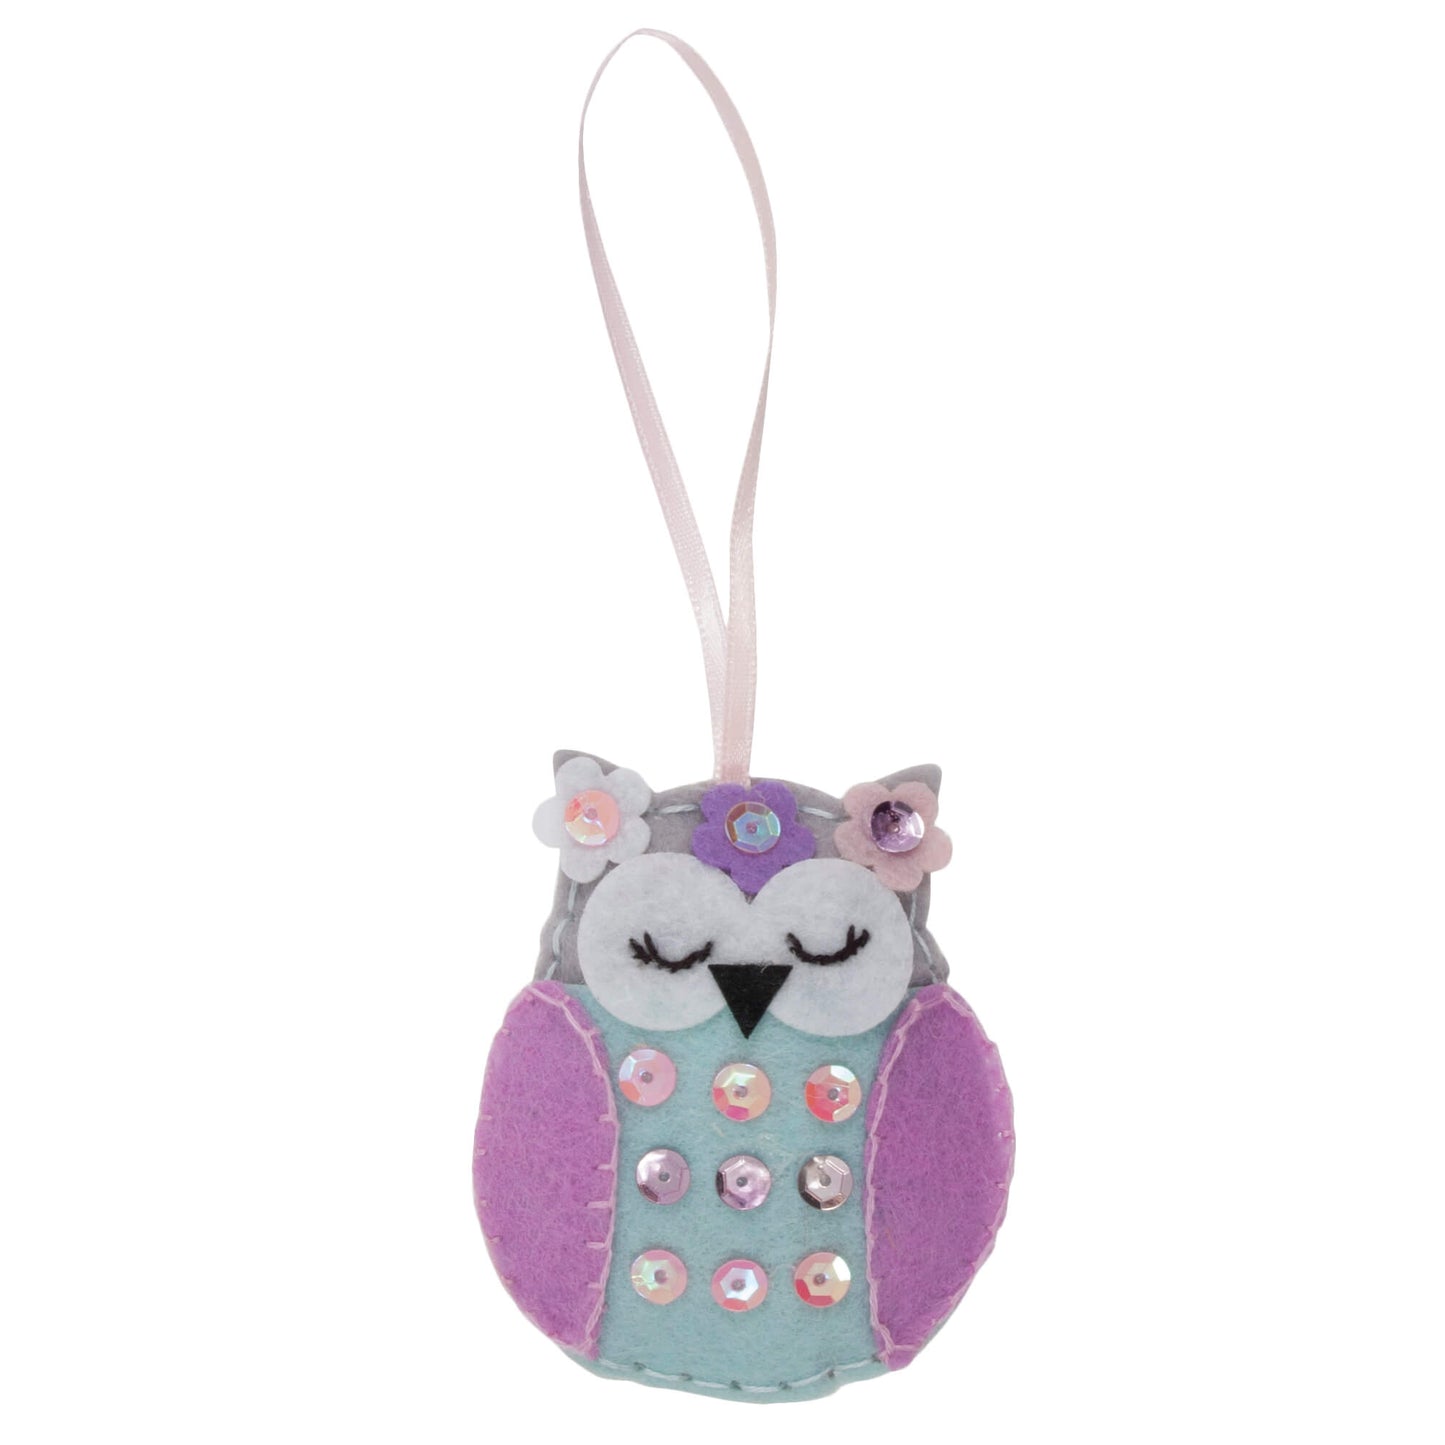  The image shows a felt owl ornament with a pink ribbon hanging from it.